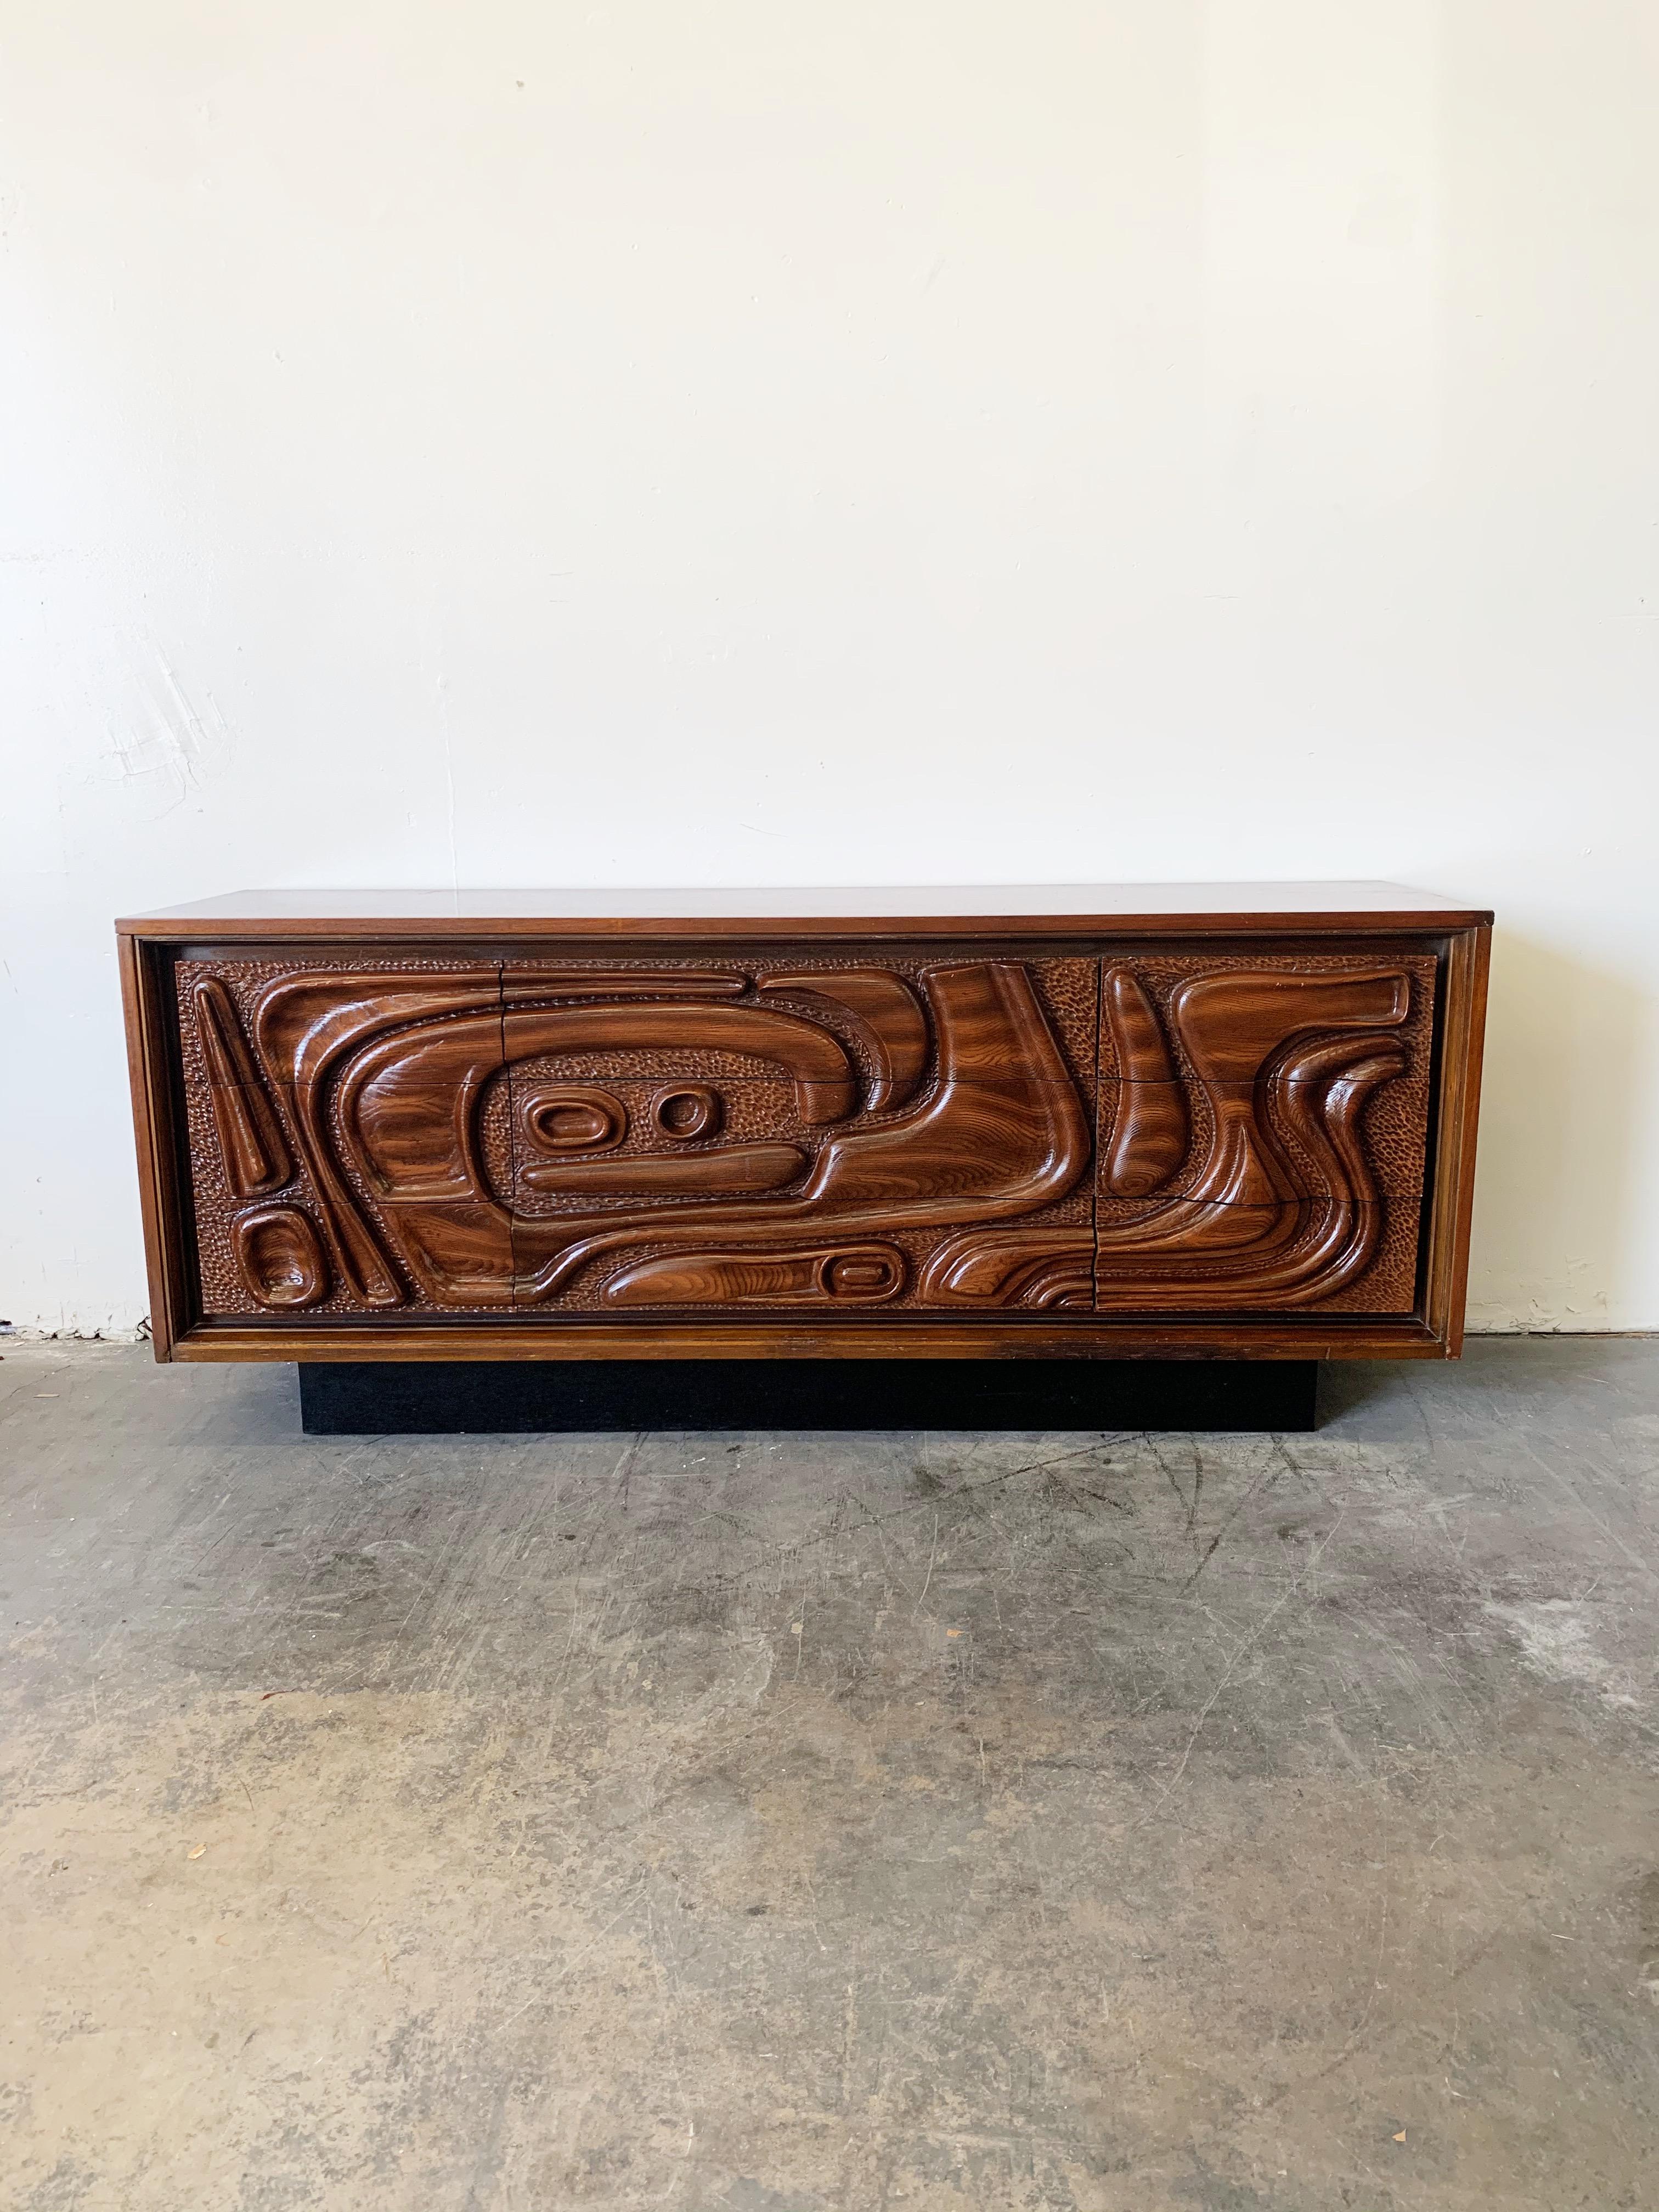 This fantastic lacquered sculpted walnut 'Oceanic' bedroom set is by Pulaski Furniture Corporation, circa 1969 which perfectly encapsulates the California surf mentality of the 1960s and 1970s, making this set highly sought after by Tiki collectors